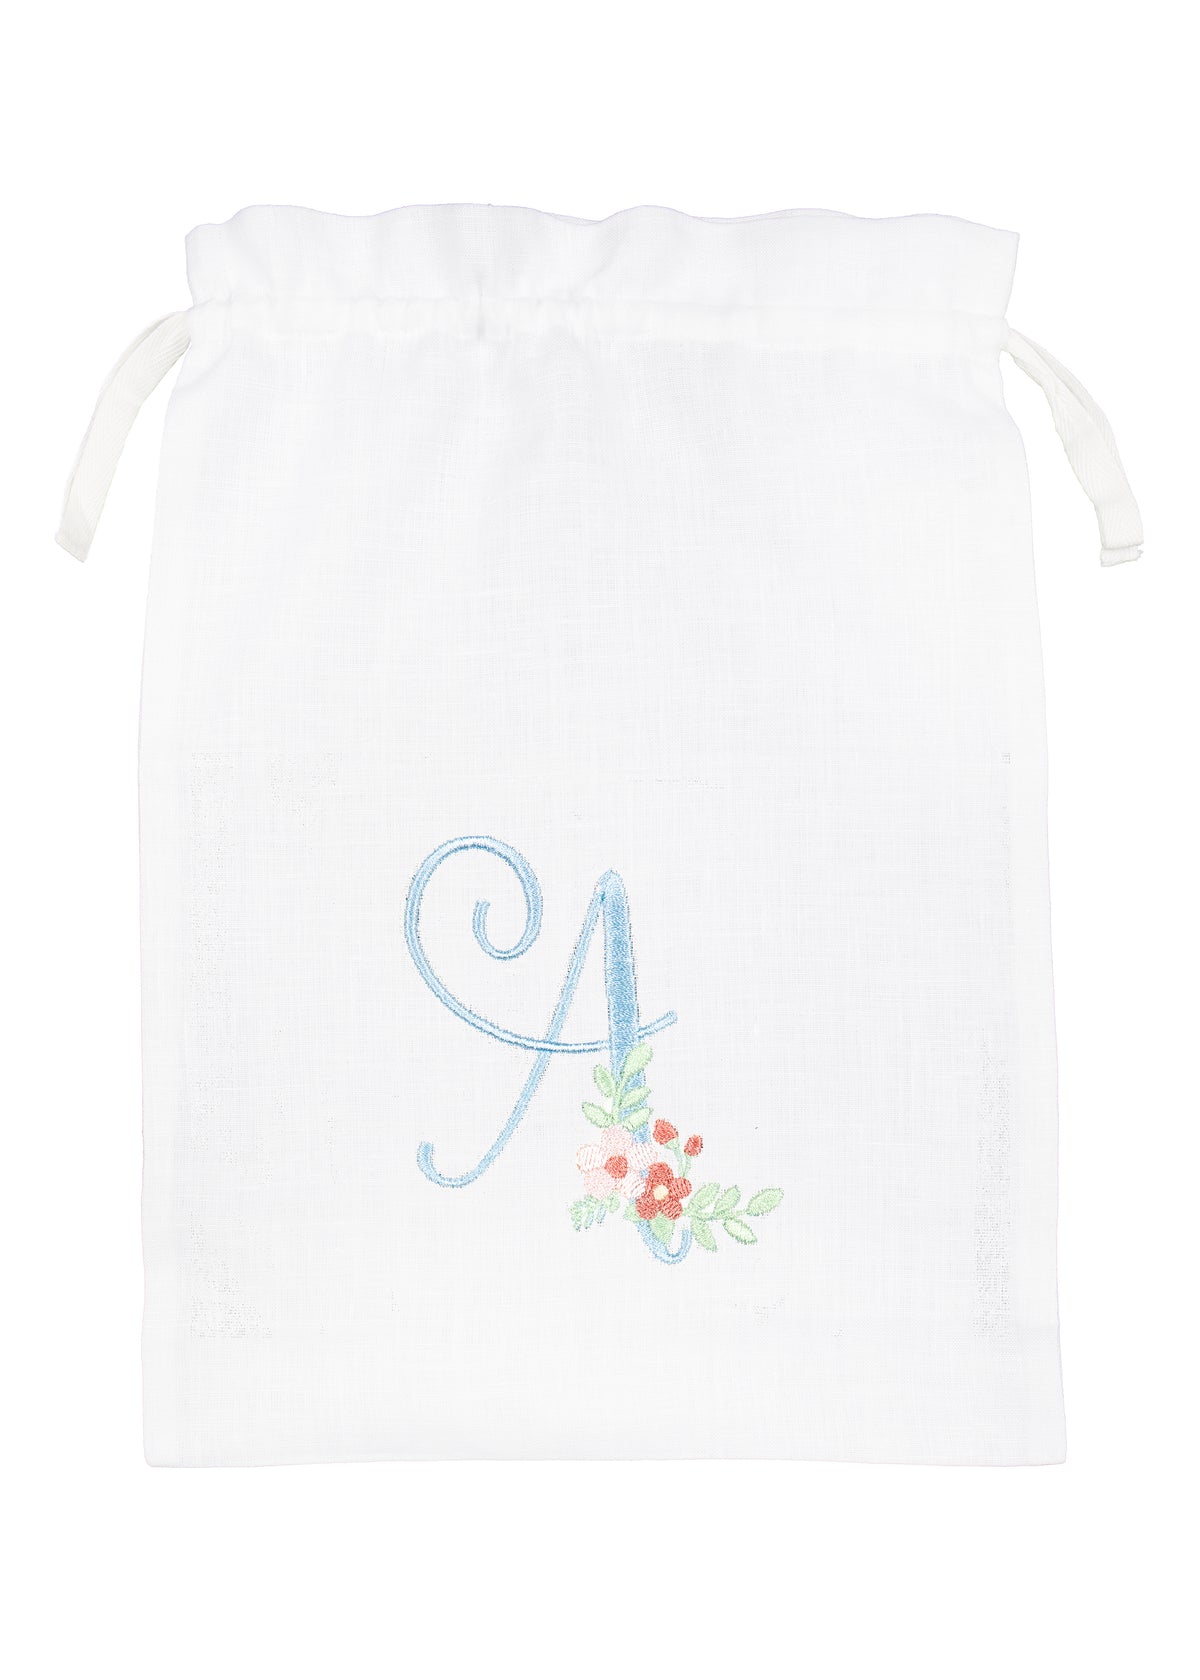 Lingerie Bag, Personalized